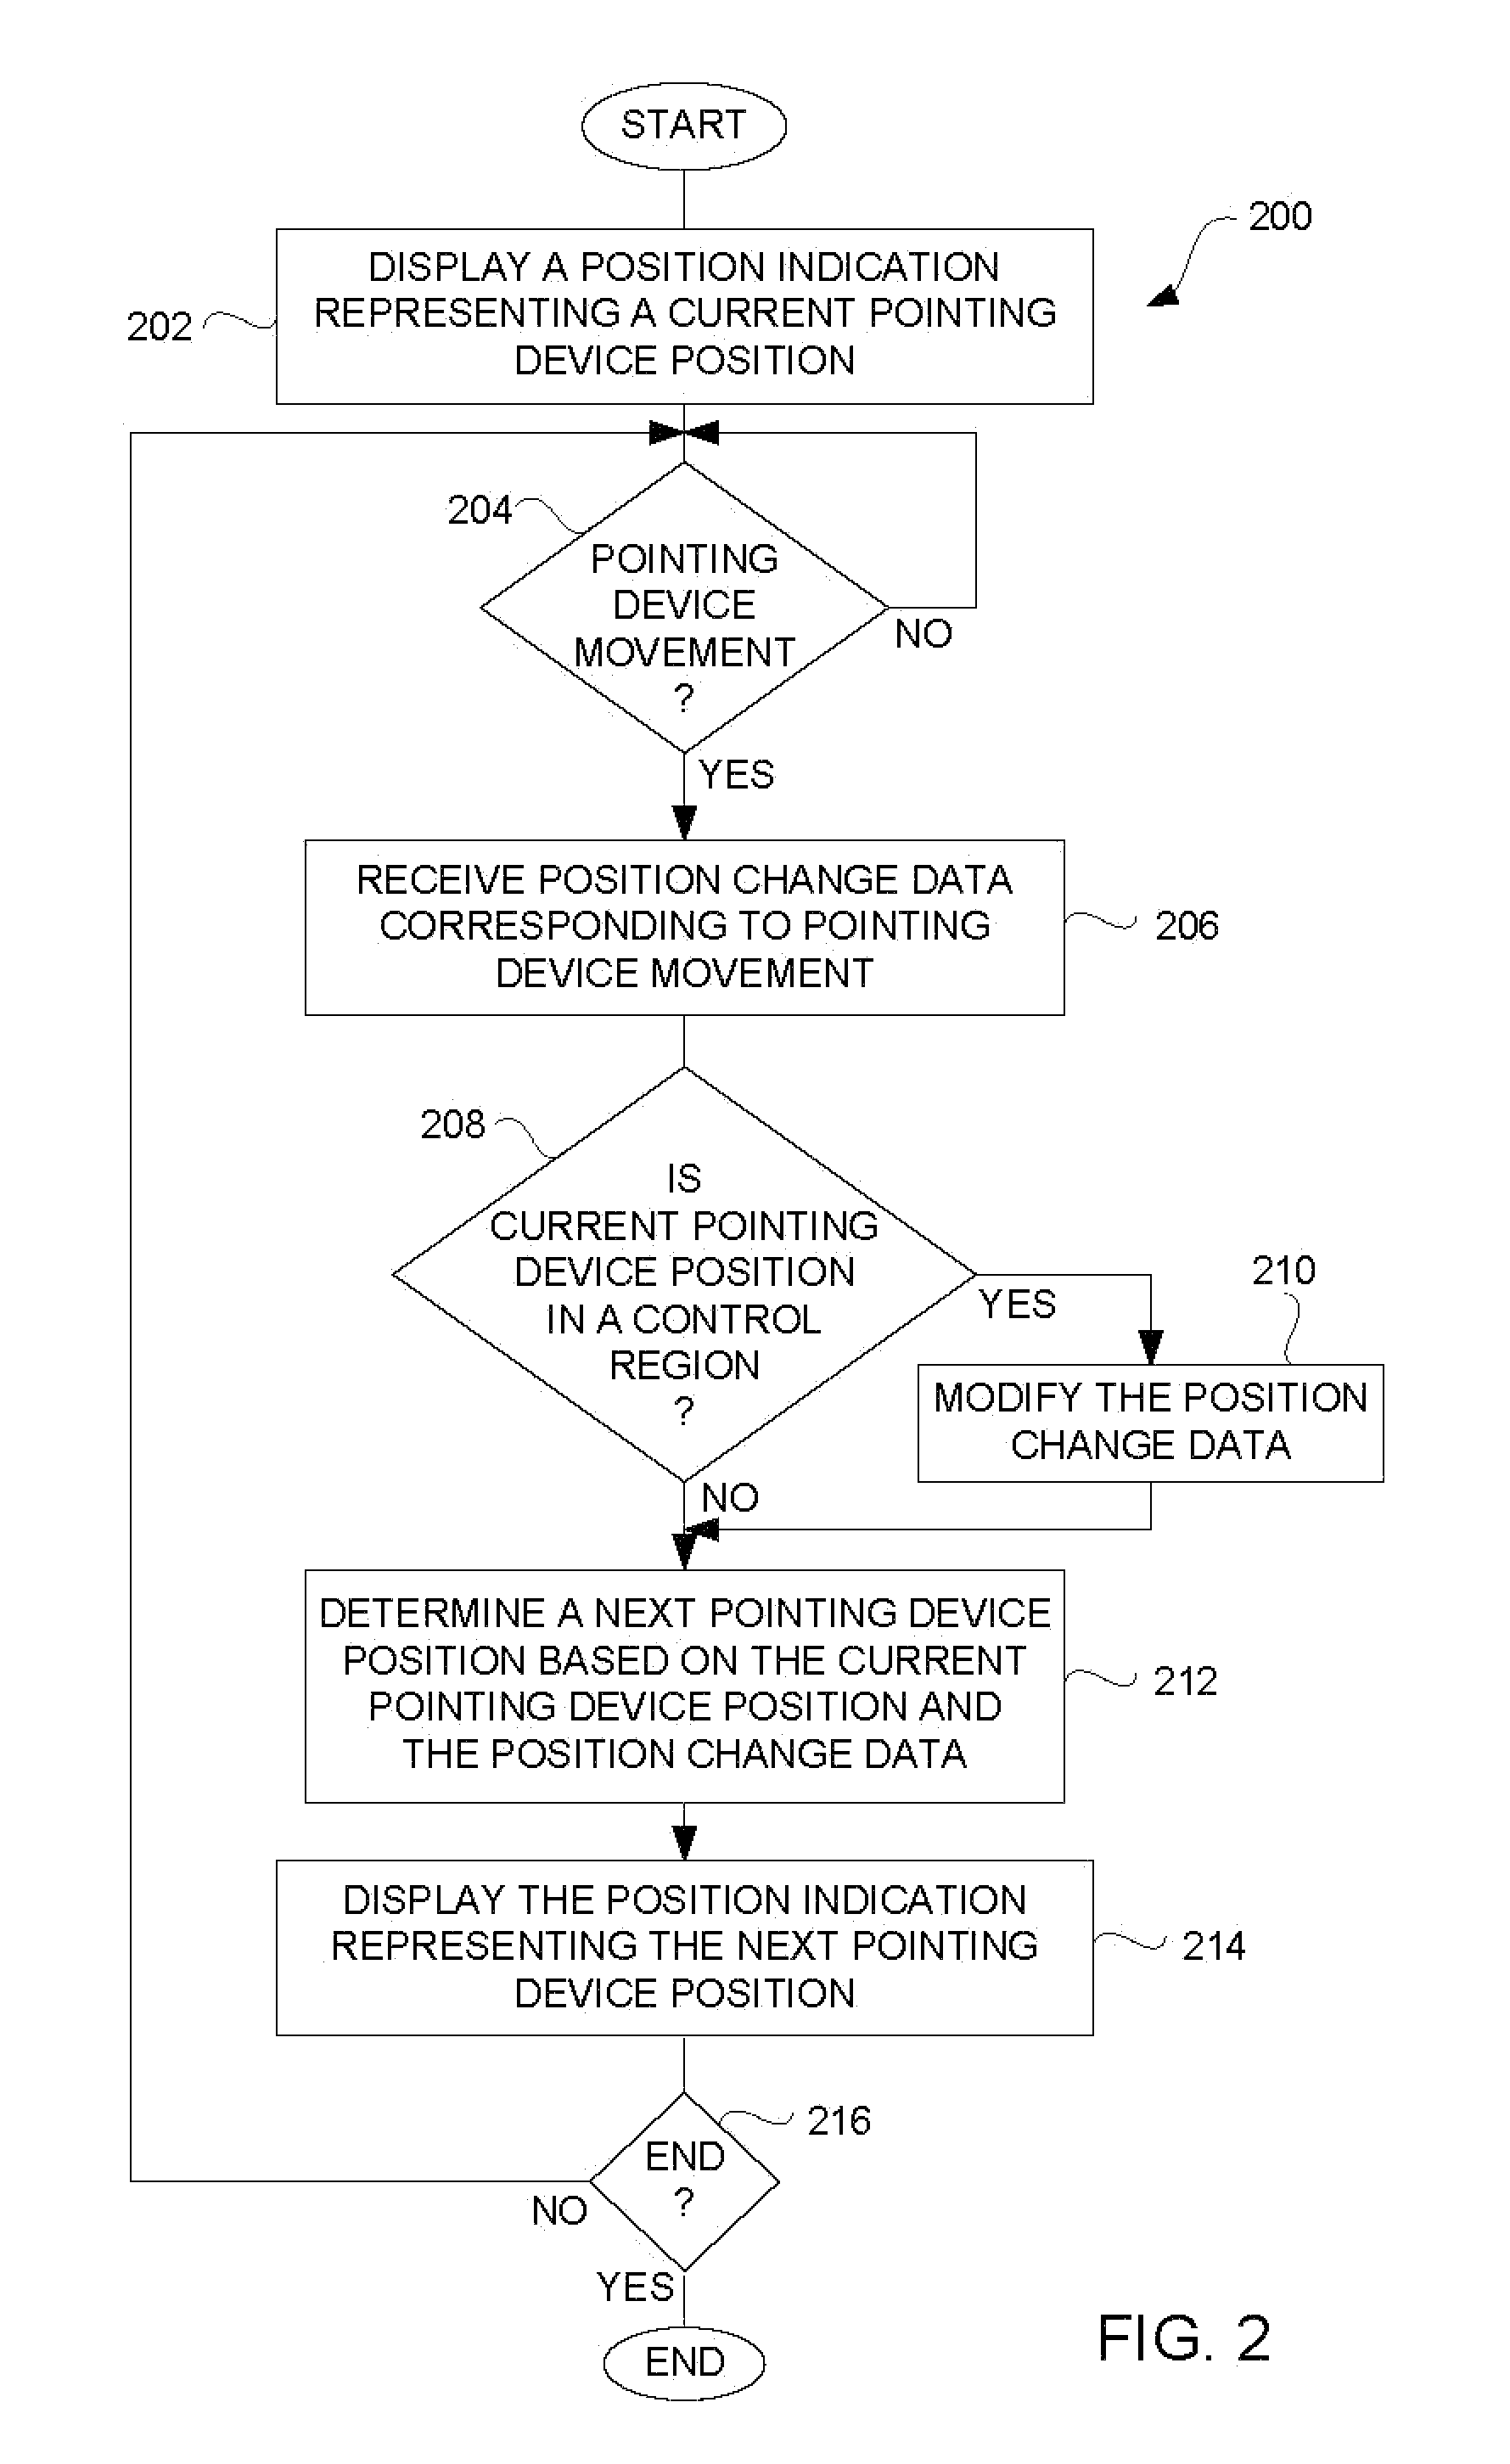 Responsiveness Control System for Pointing Device Movement with Respect to a Graphical User Interface